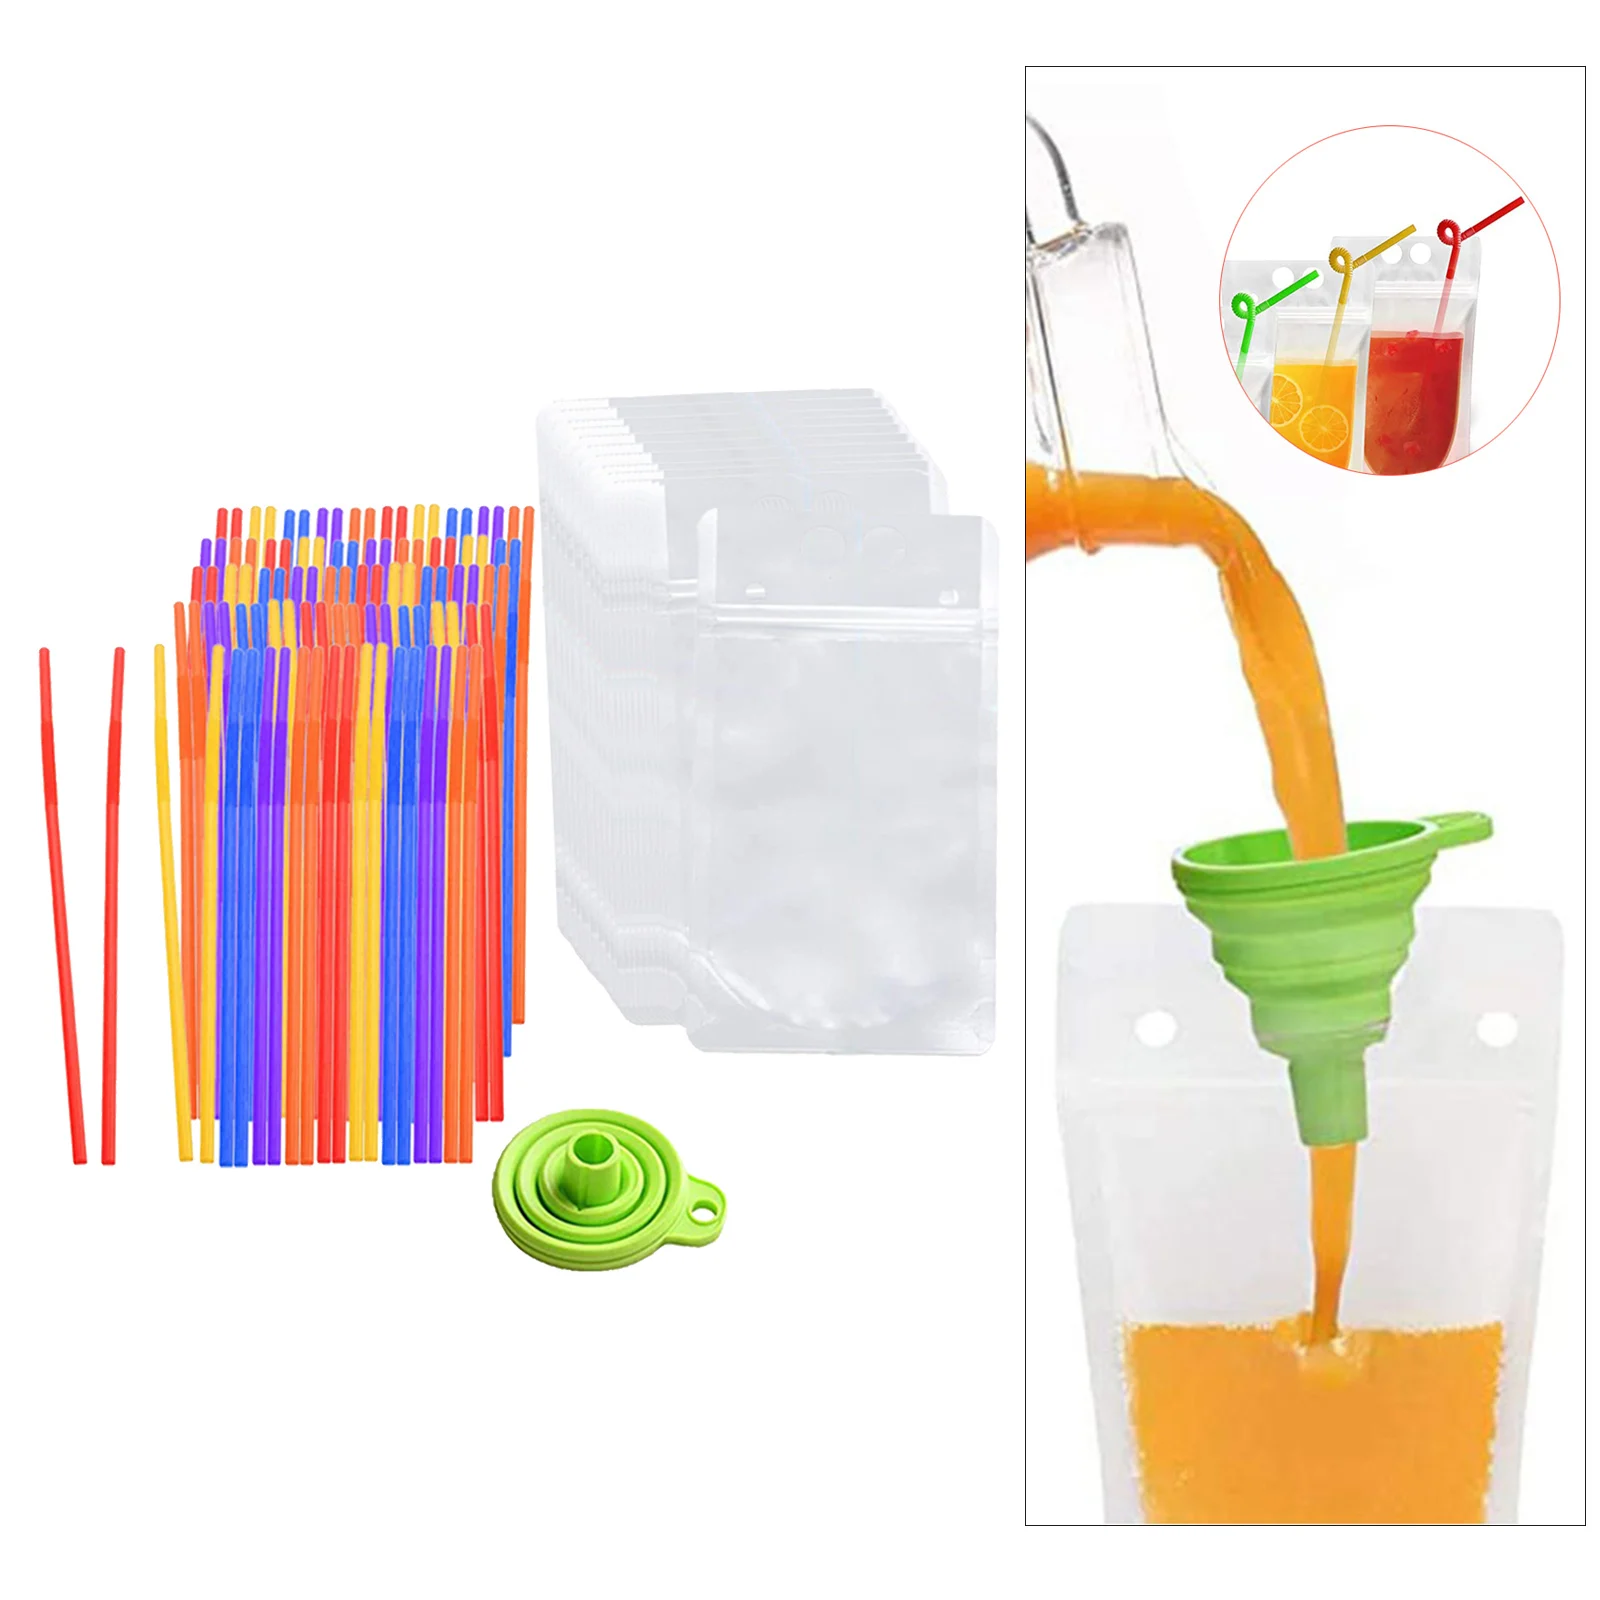 https://ae01.alicdn.com/kf/H41a61676238445e2bd94b0642837837dC/100-x-Plastic-Drink-Pouches-No-Leak-Juice-Bags-500ml-with-Straws-Funnel.jpg